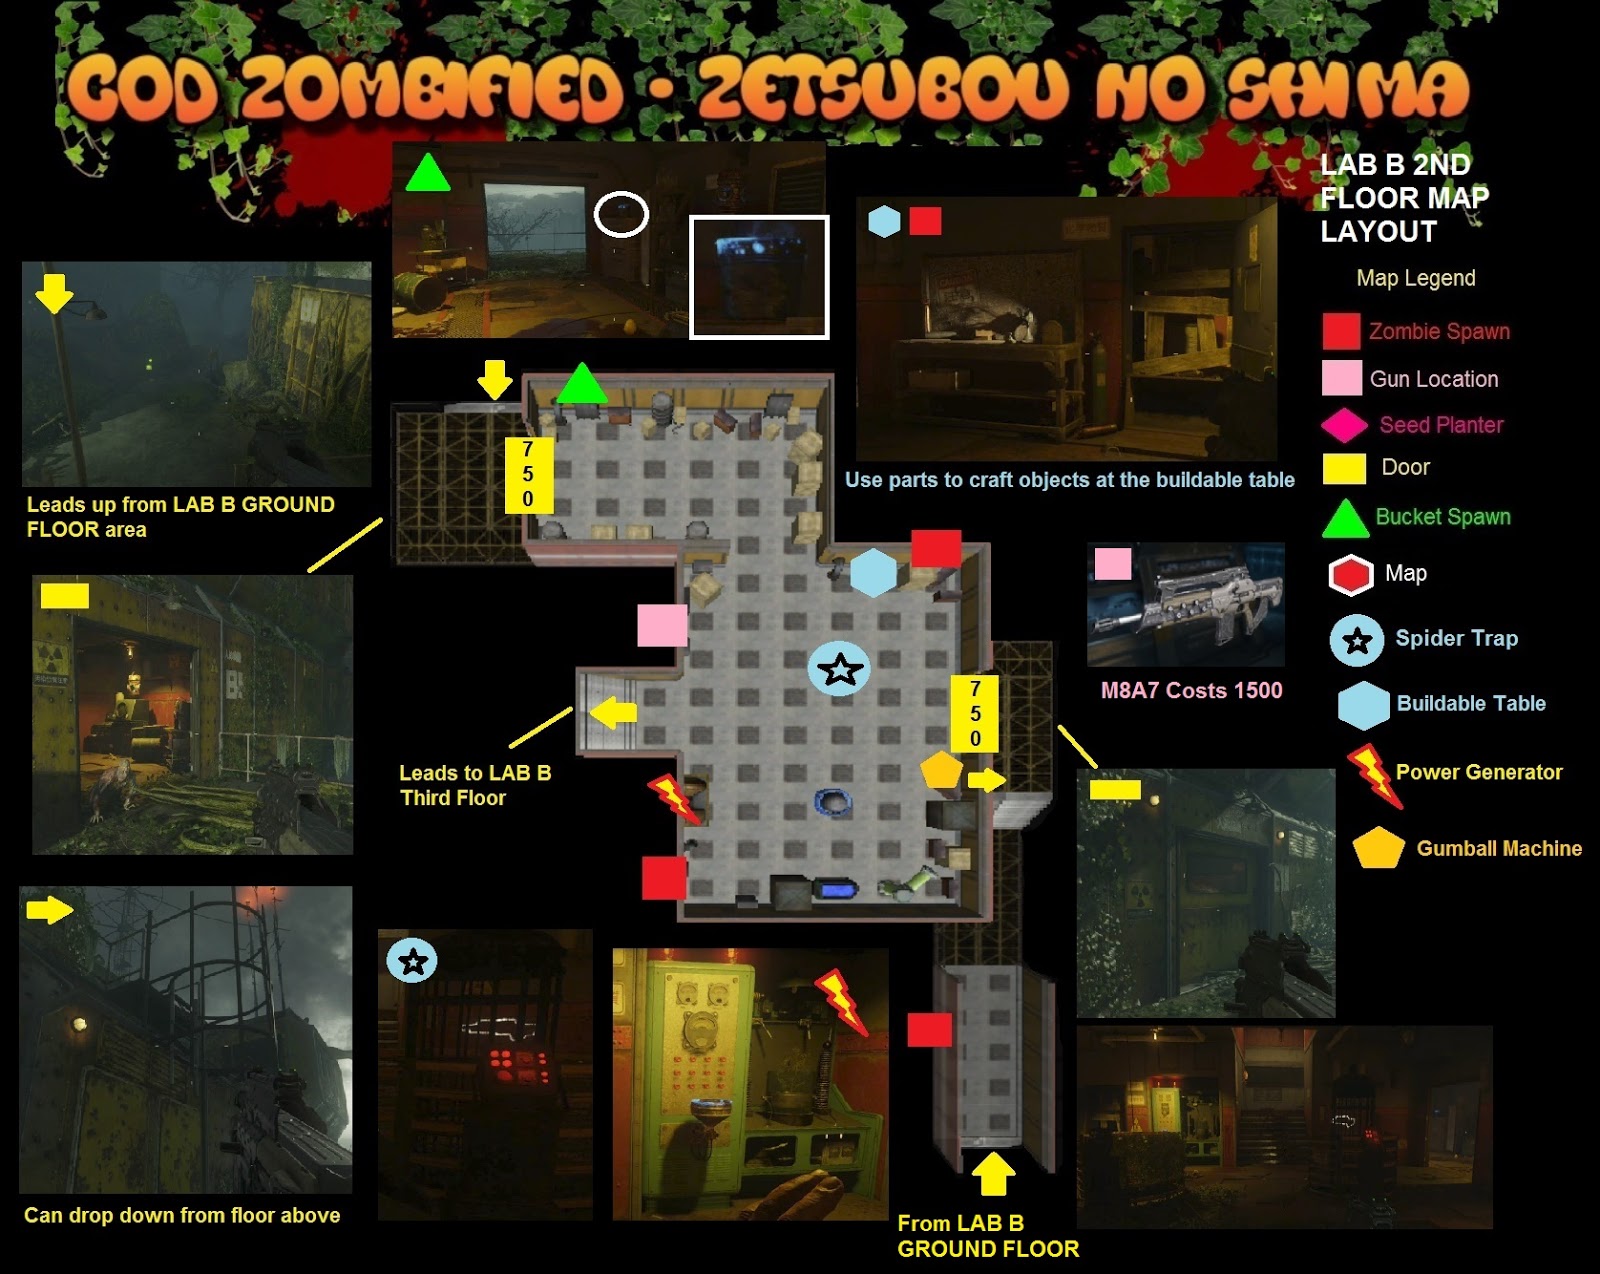 Zombified - Call Of Duty Zombie Map Layouts, Secrets, Easter Eggs 